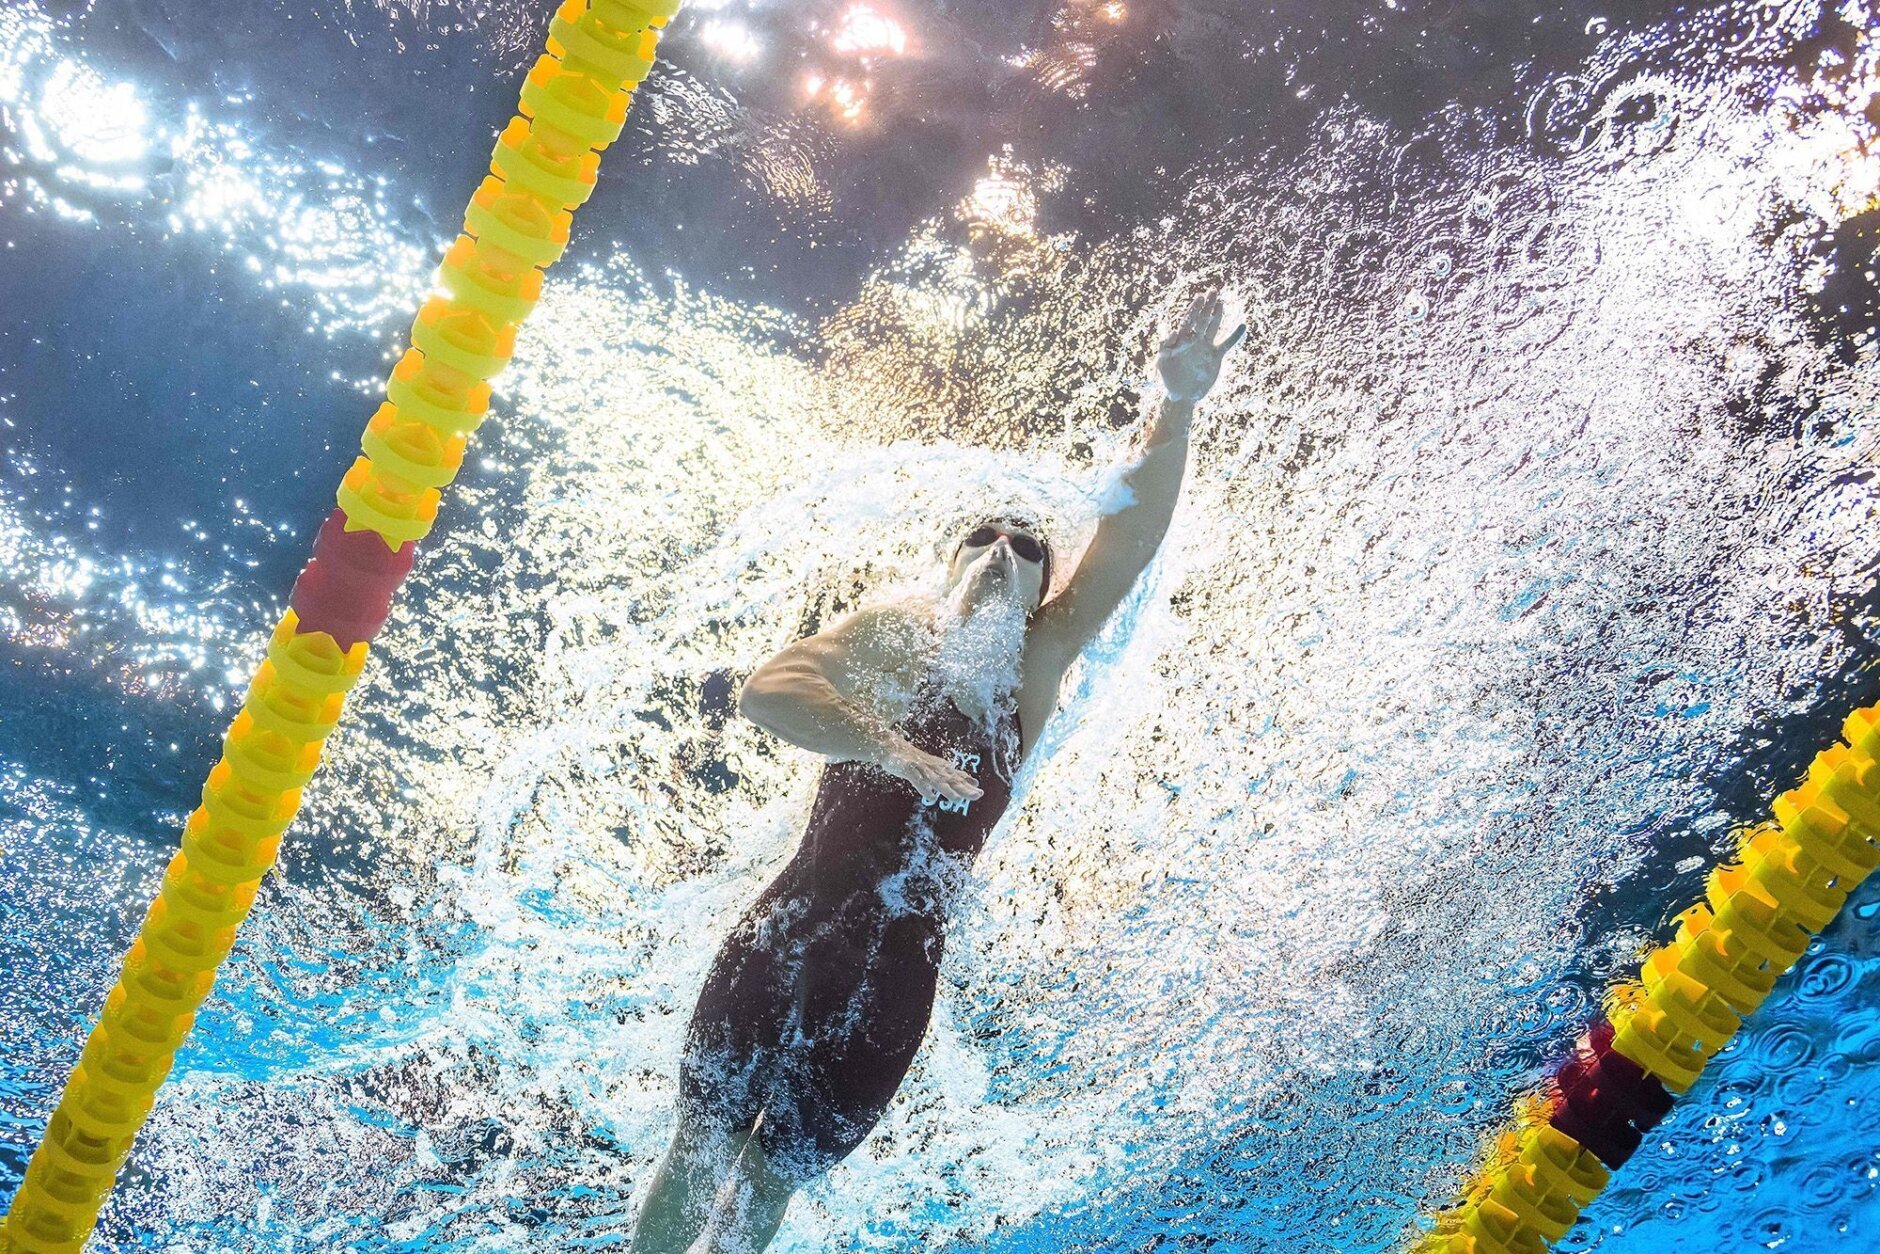 Google Says Katie Ledecky's The Greatest Female Swimmer Of All Time. Is She?  